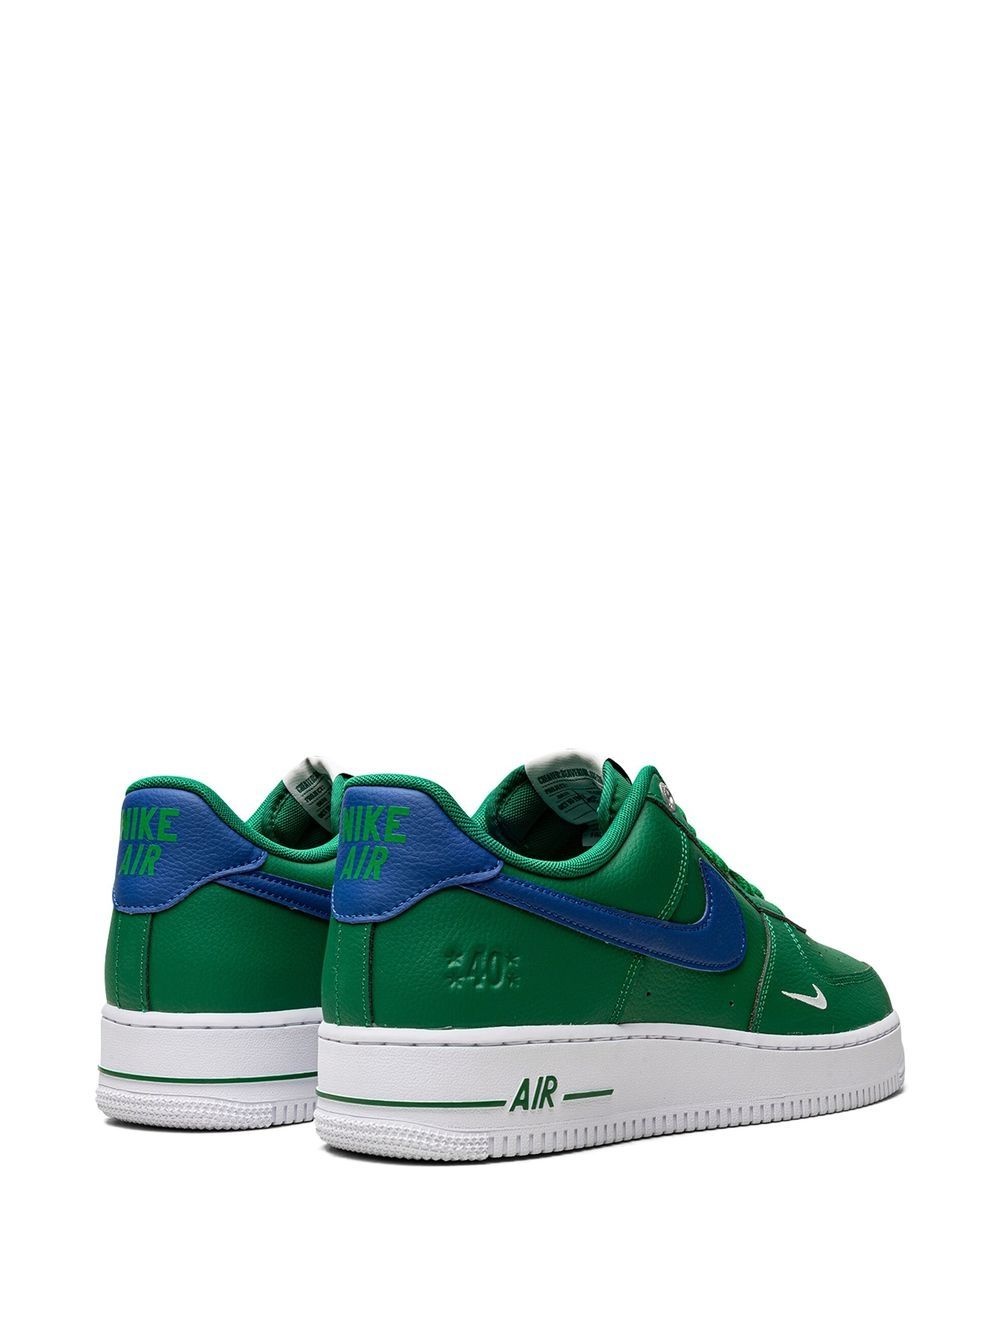 Air Force 1 Low "Malachite - Green" sneakers - 3